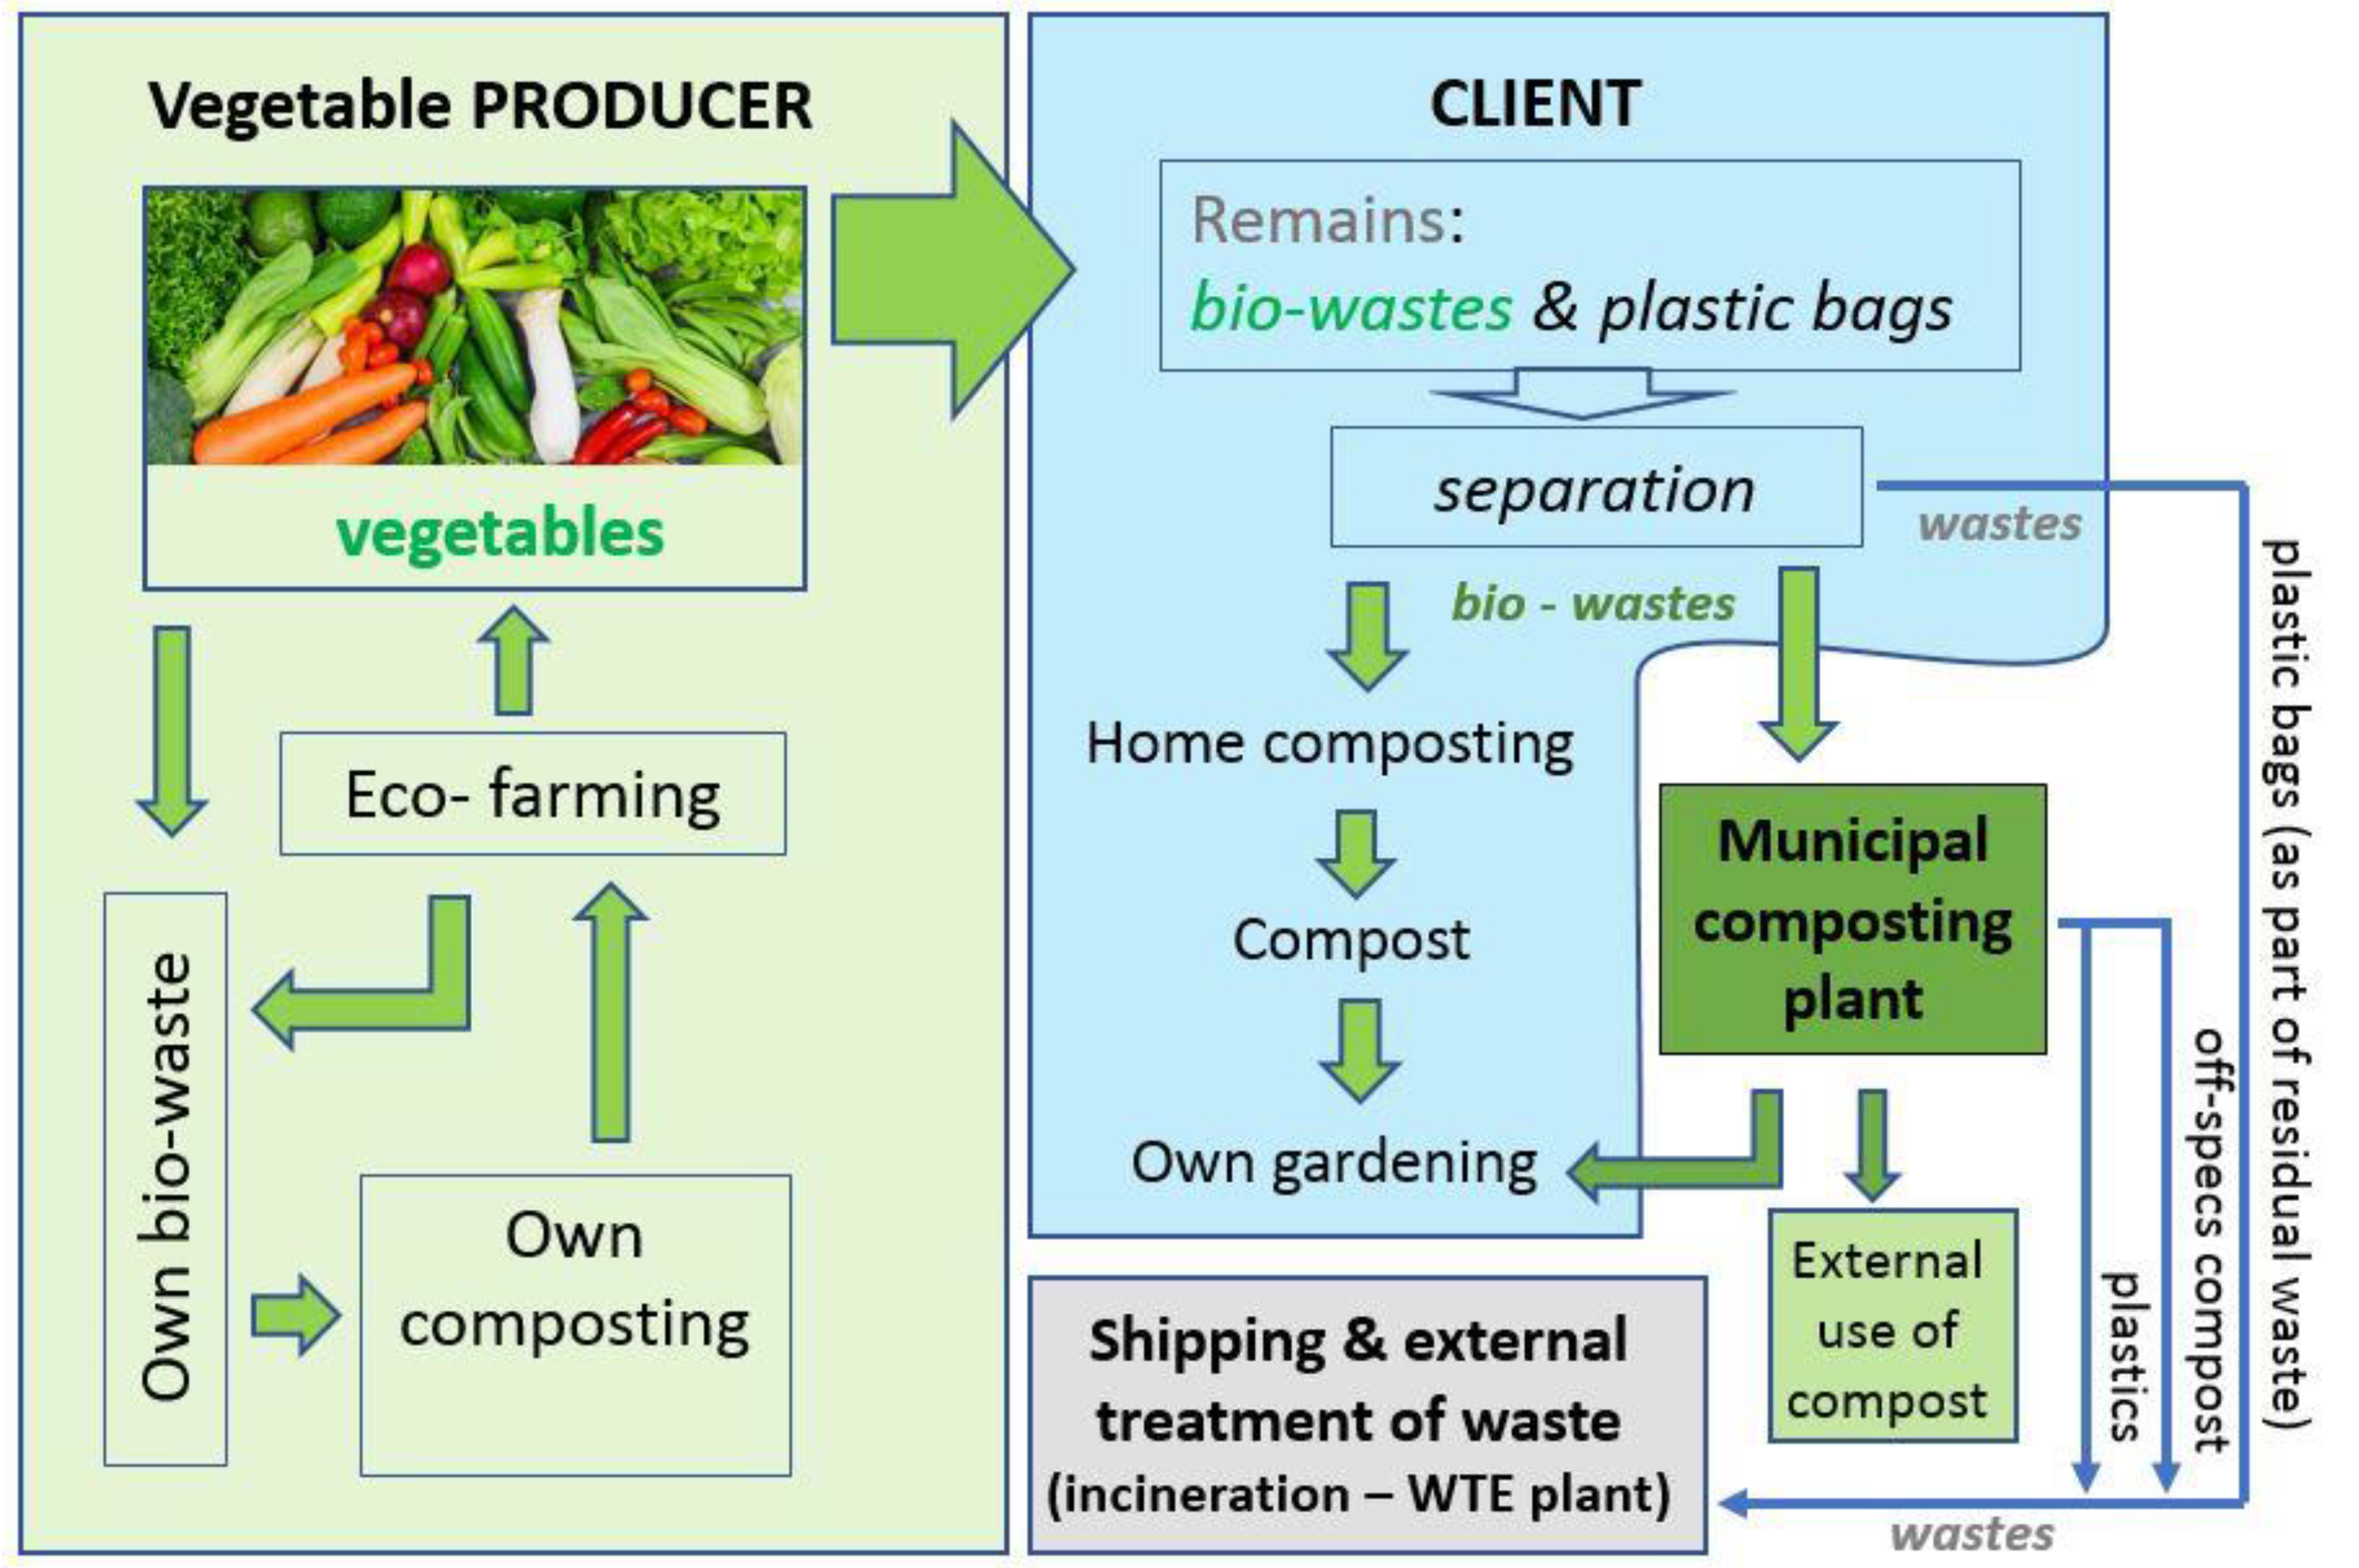 Paper-based produce packaging for sustainability, 2021-04-06